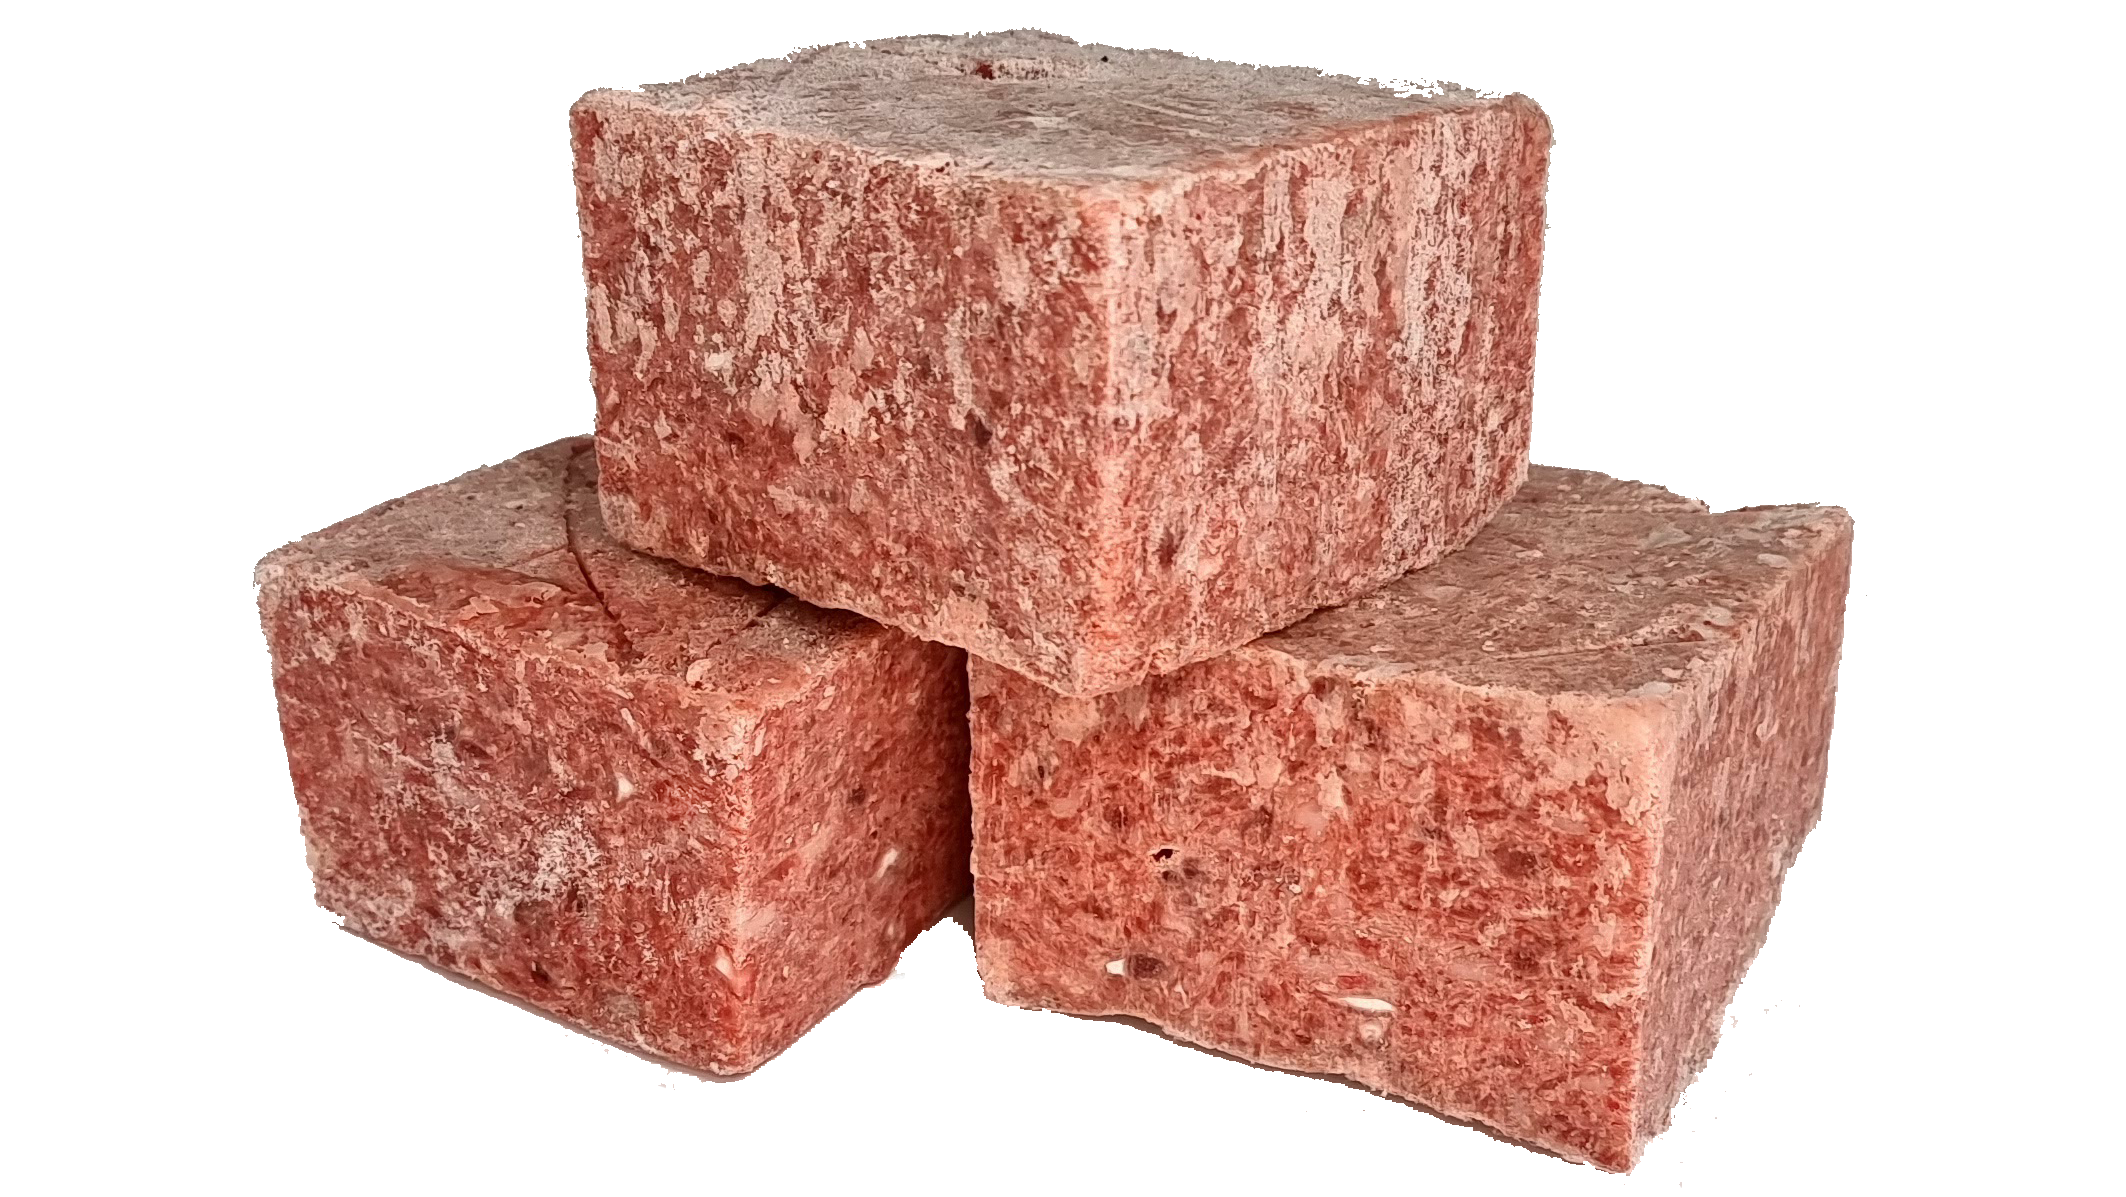 Minced Chicken with Bone 5kgs (11lb) 12 Small blocks for working dogs